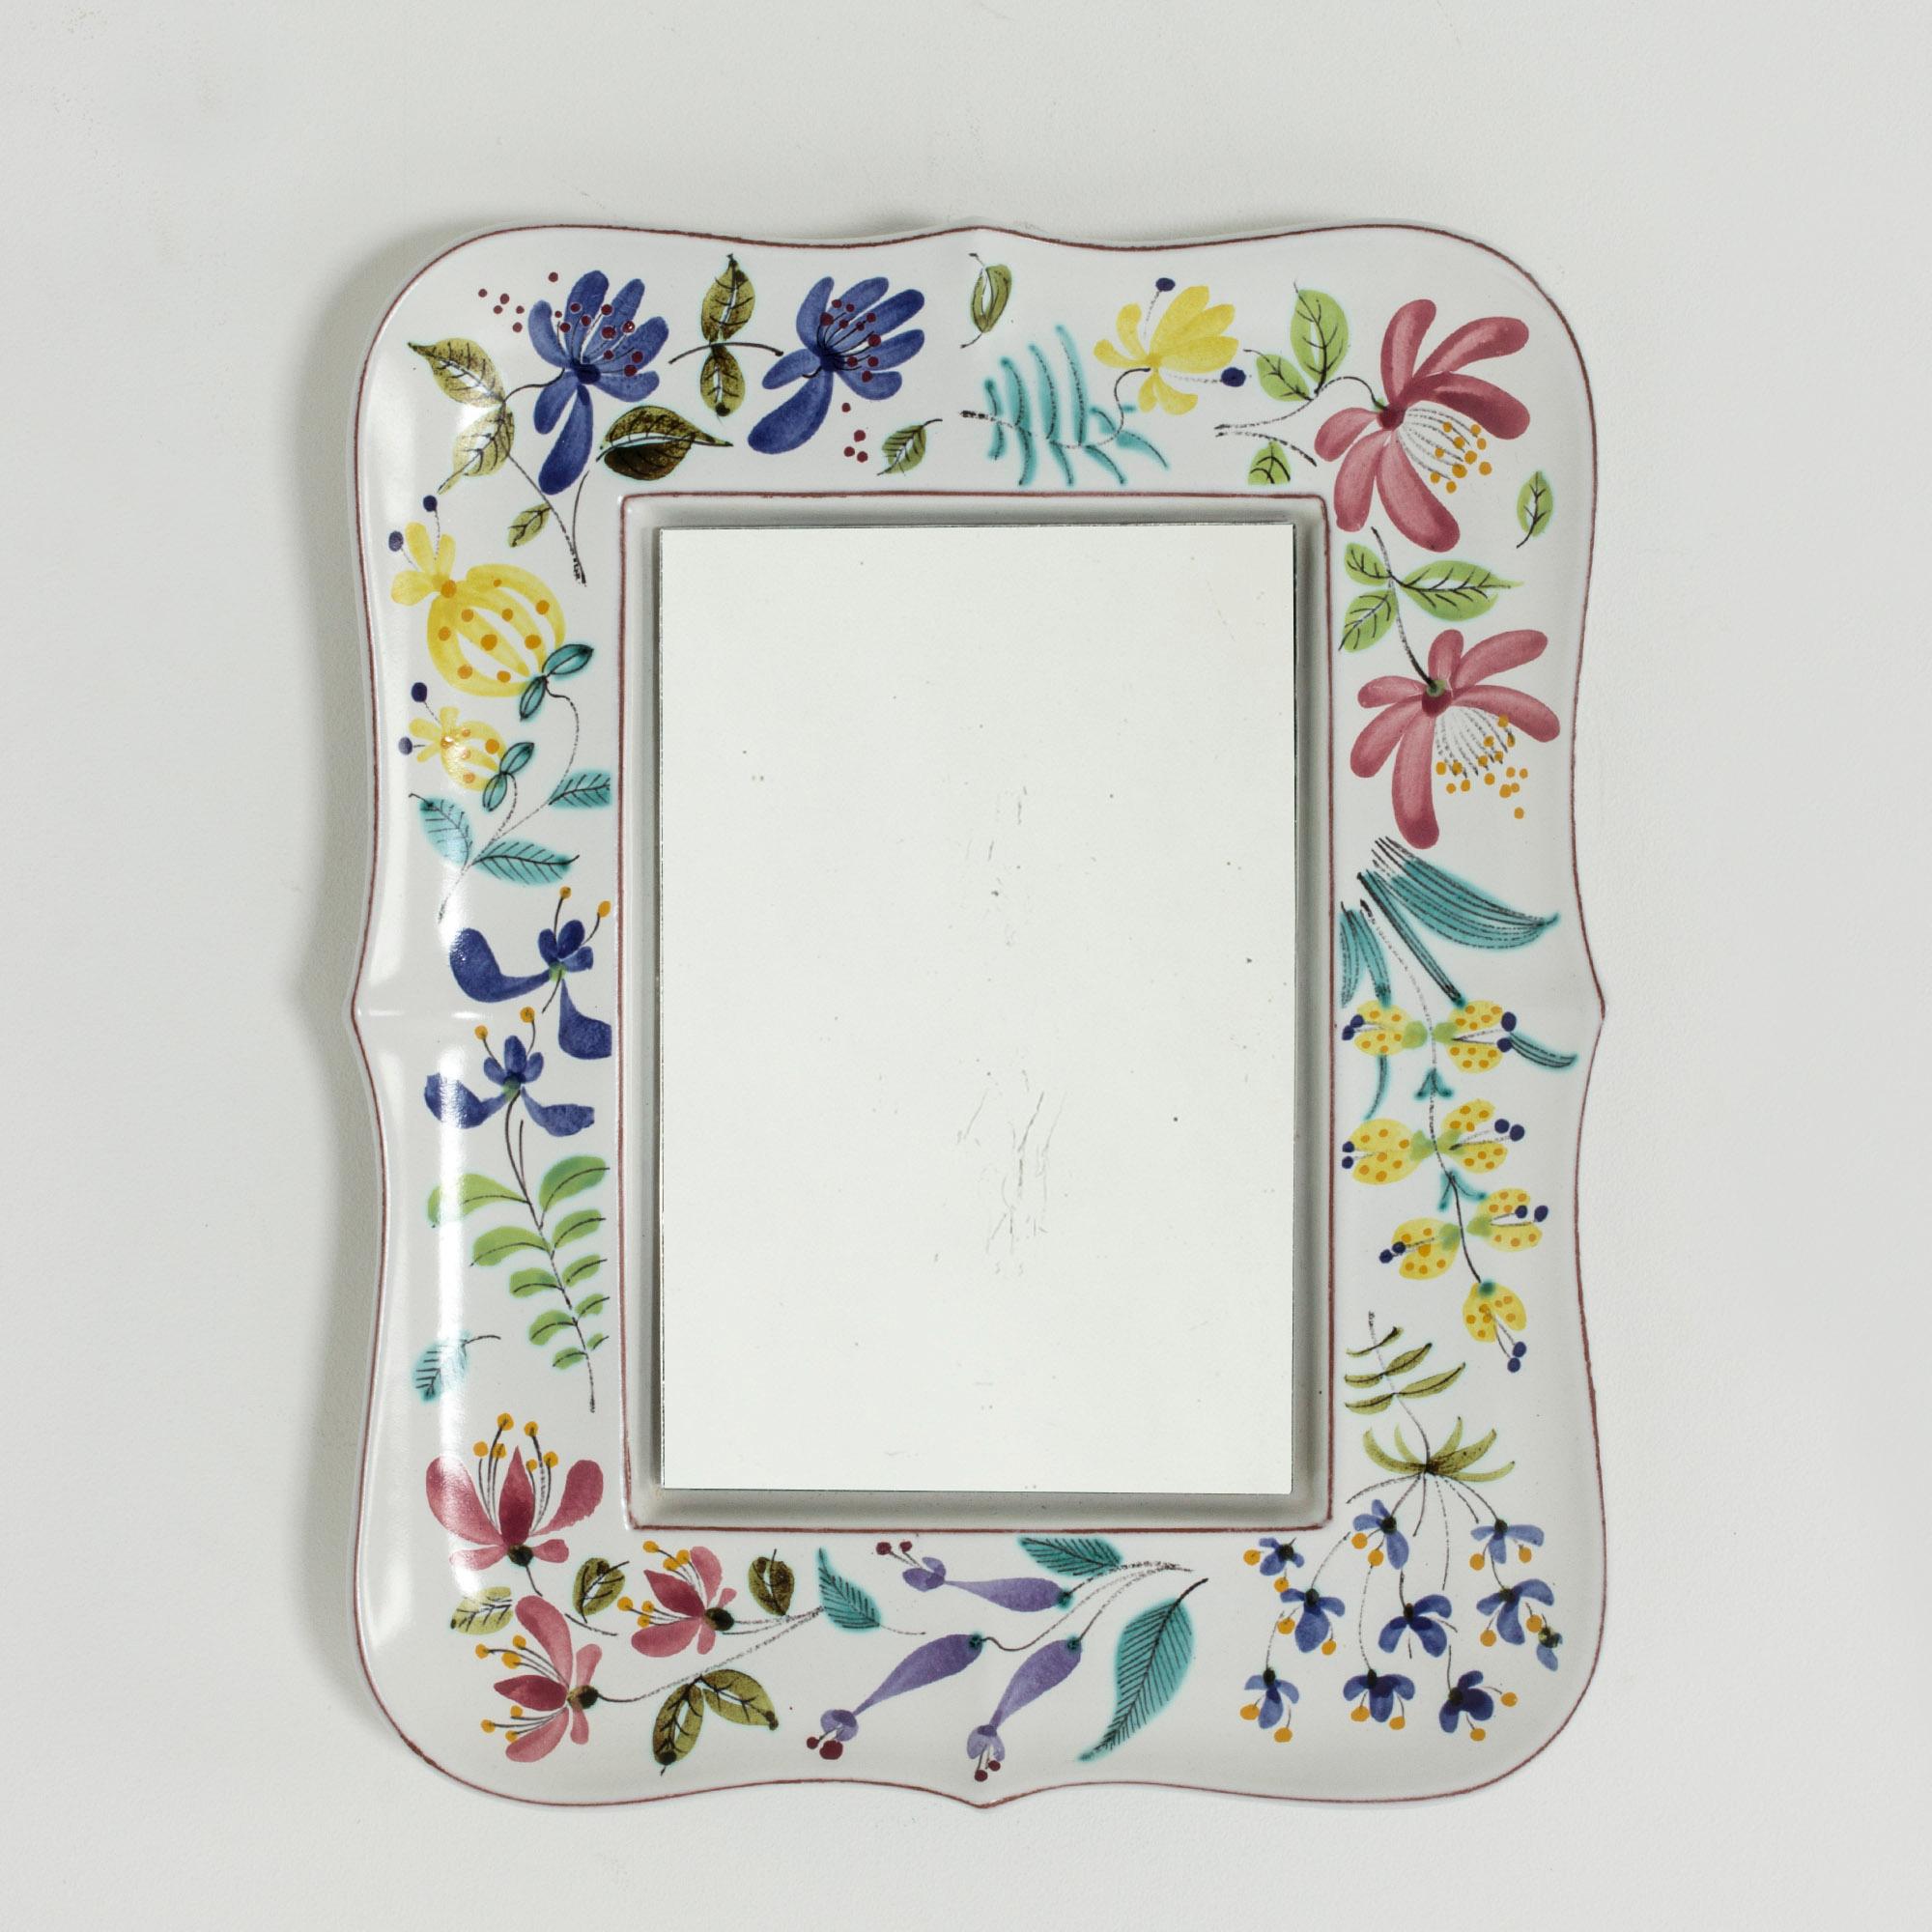 Beautiful faience wall mirror by Stig Lindberg with a vivacious, colorful decor of flowers and leaves.